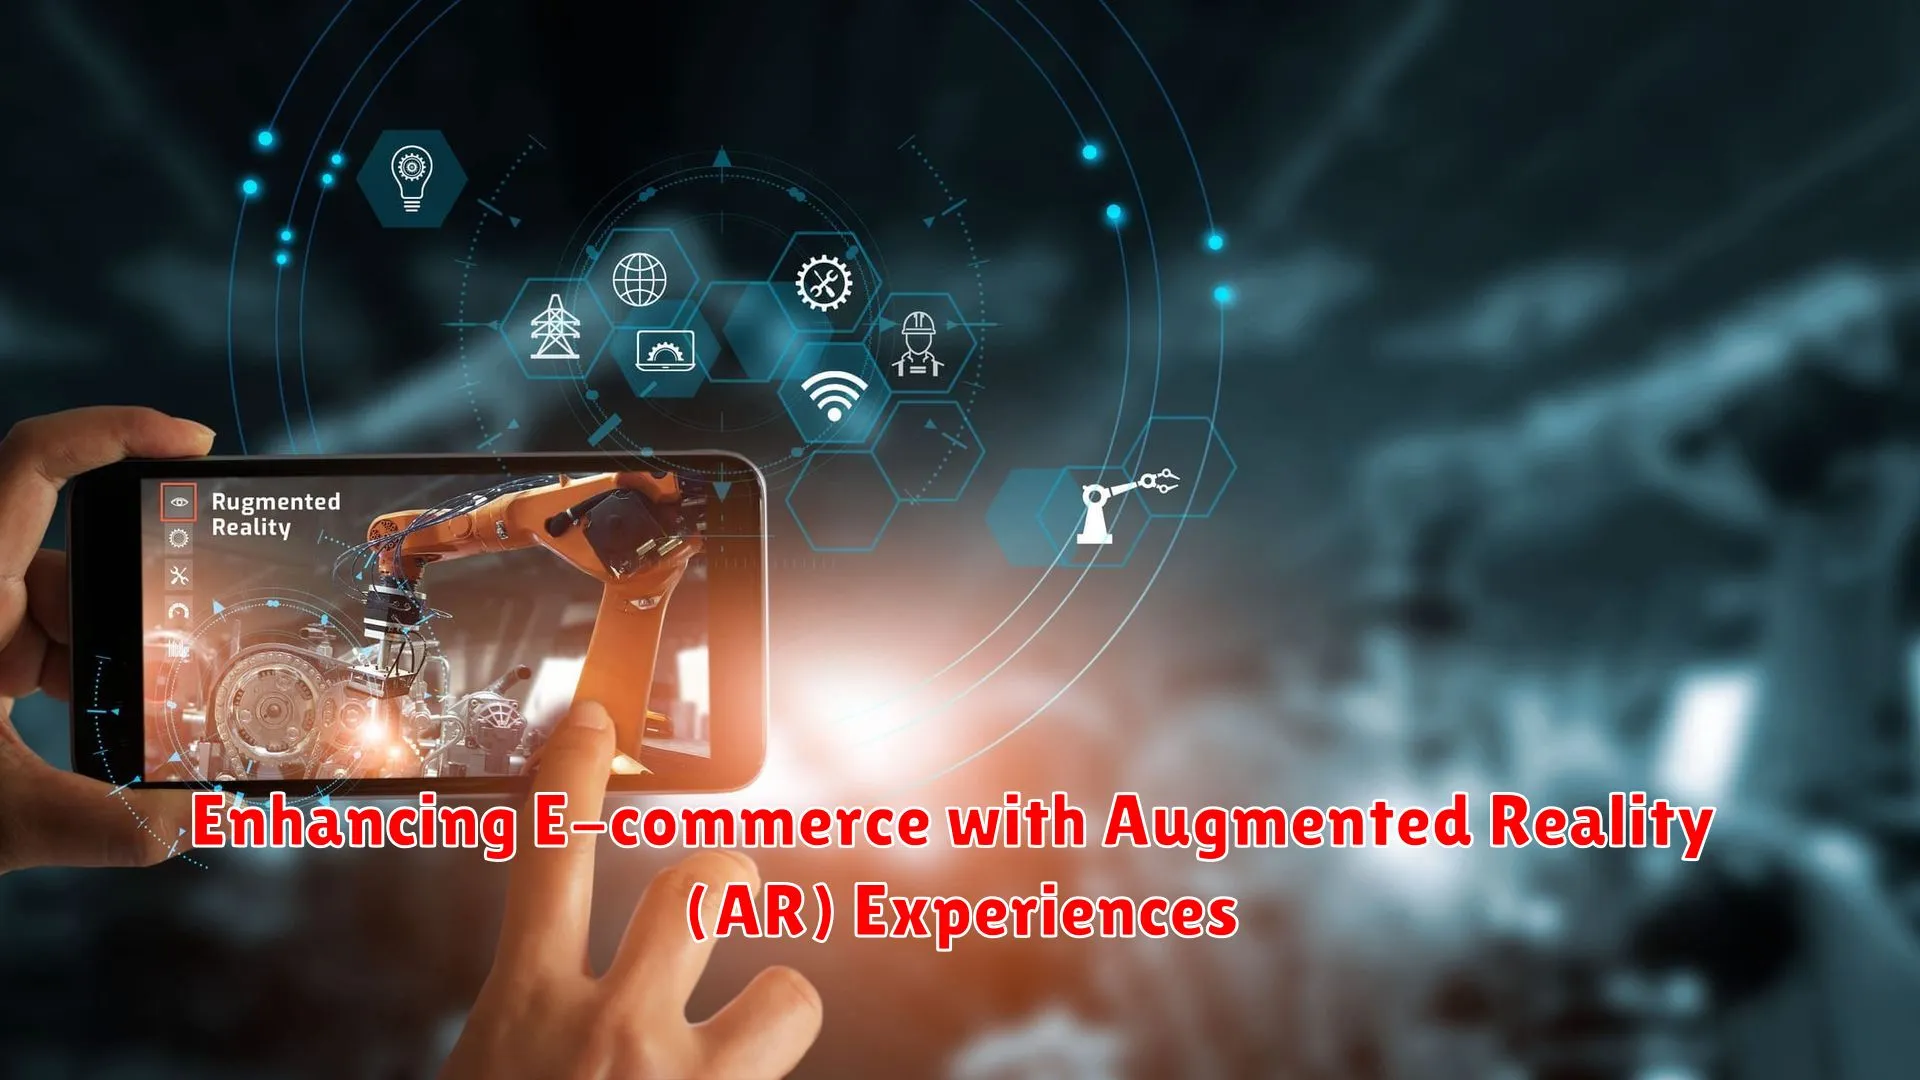 Enhancing E-commerce with Augmented Reality (AR) Experiences